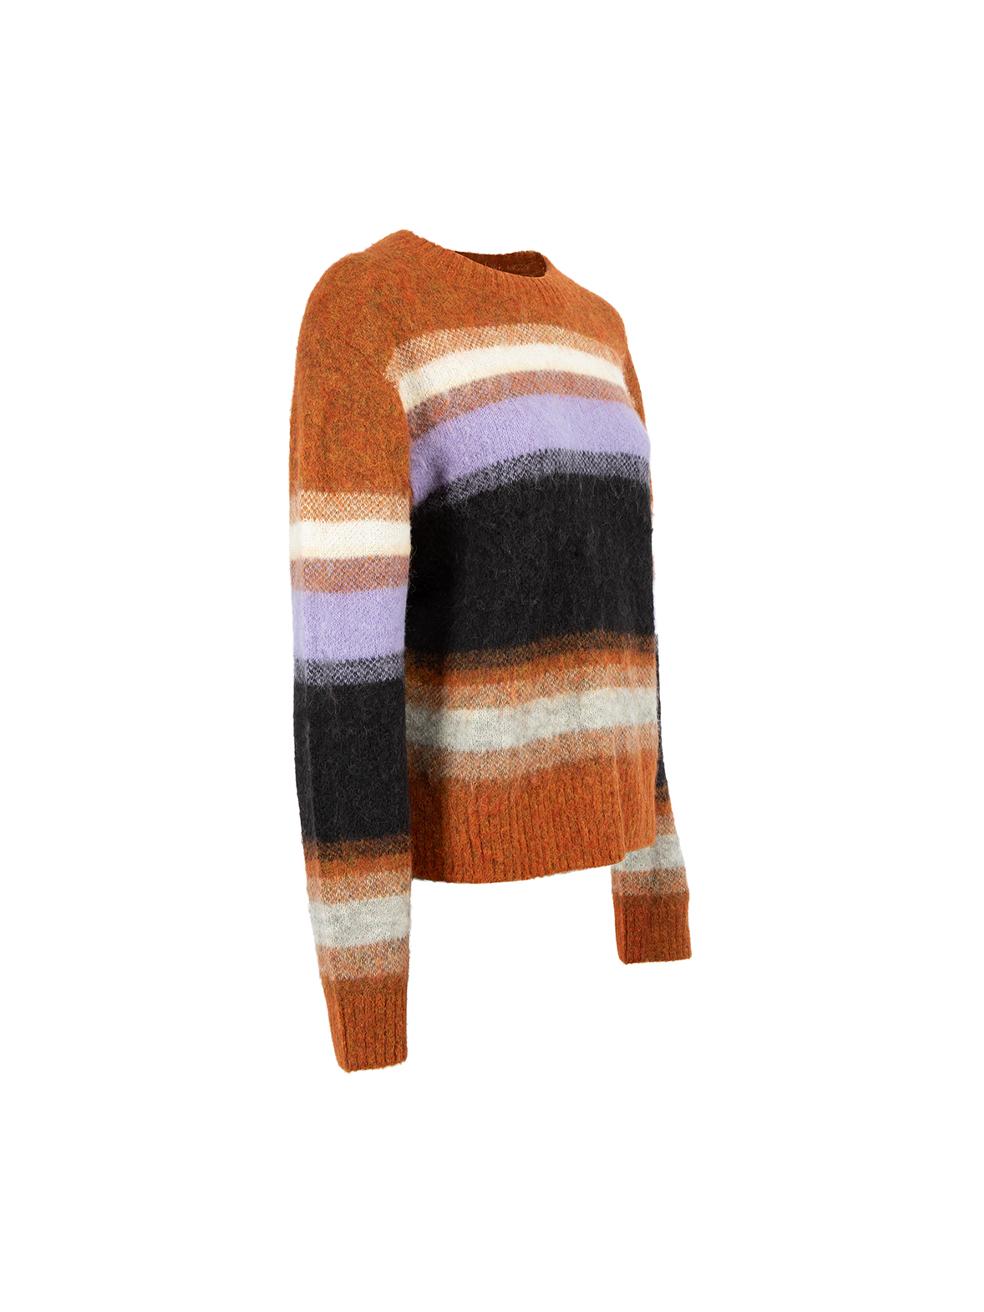 CONDITION is Very good. Hardly any visible wear to knitwear is evident on this used Acne Studios designer resale item.

Details
Multicolour
Synthetic
Knit jumper
Round neck
Long sleeves
Striped pattern
Made in China 

Composition
45% Nylon, 28%